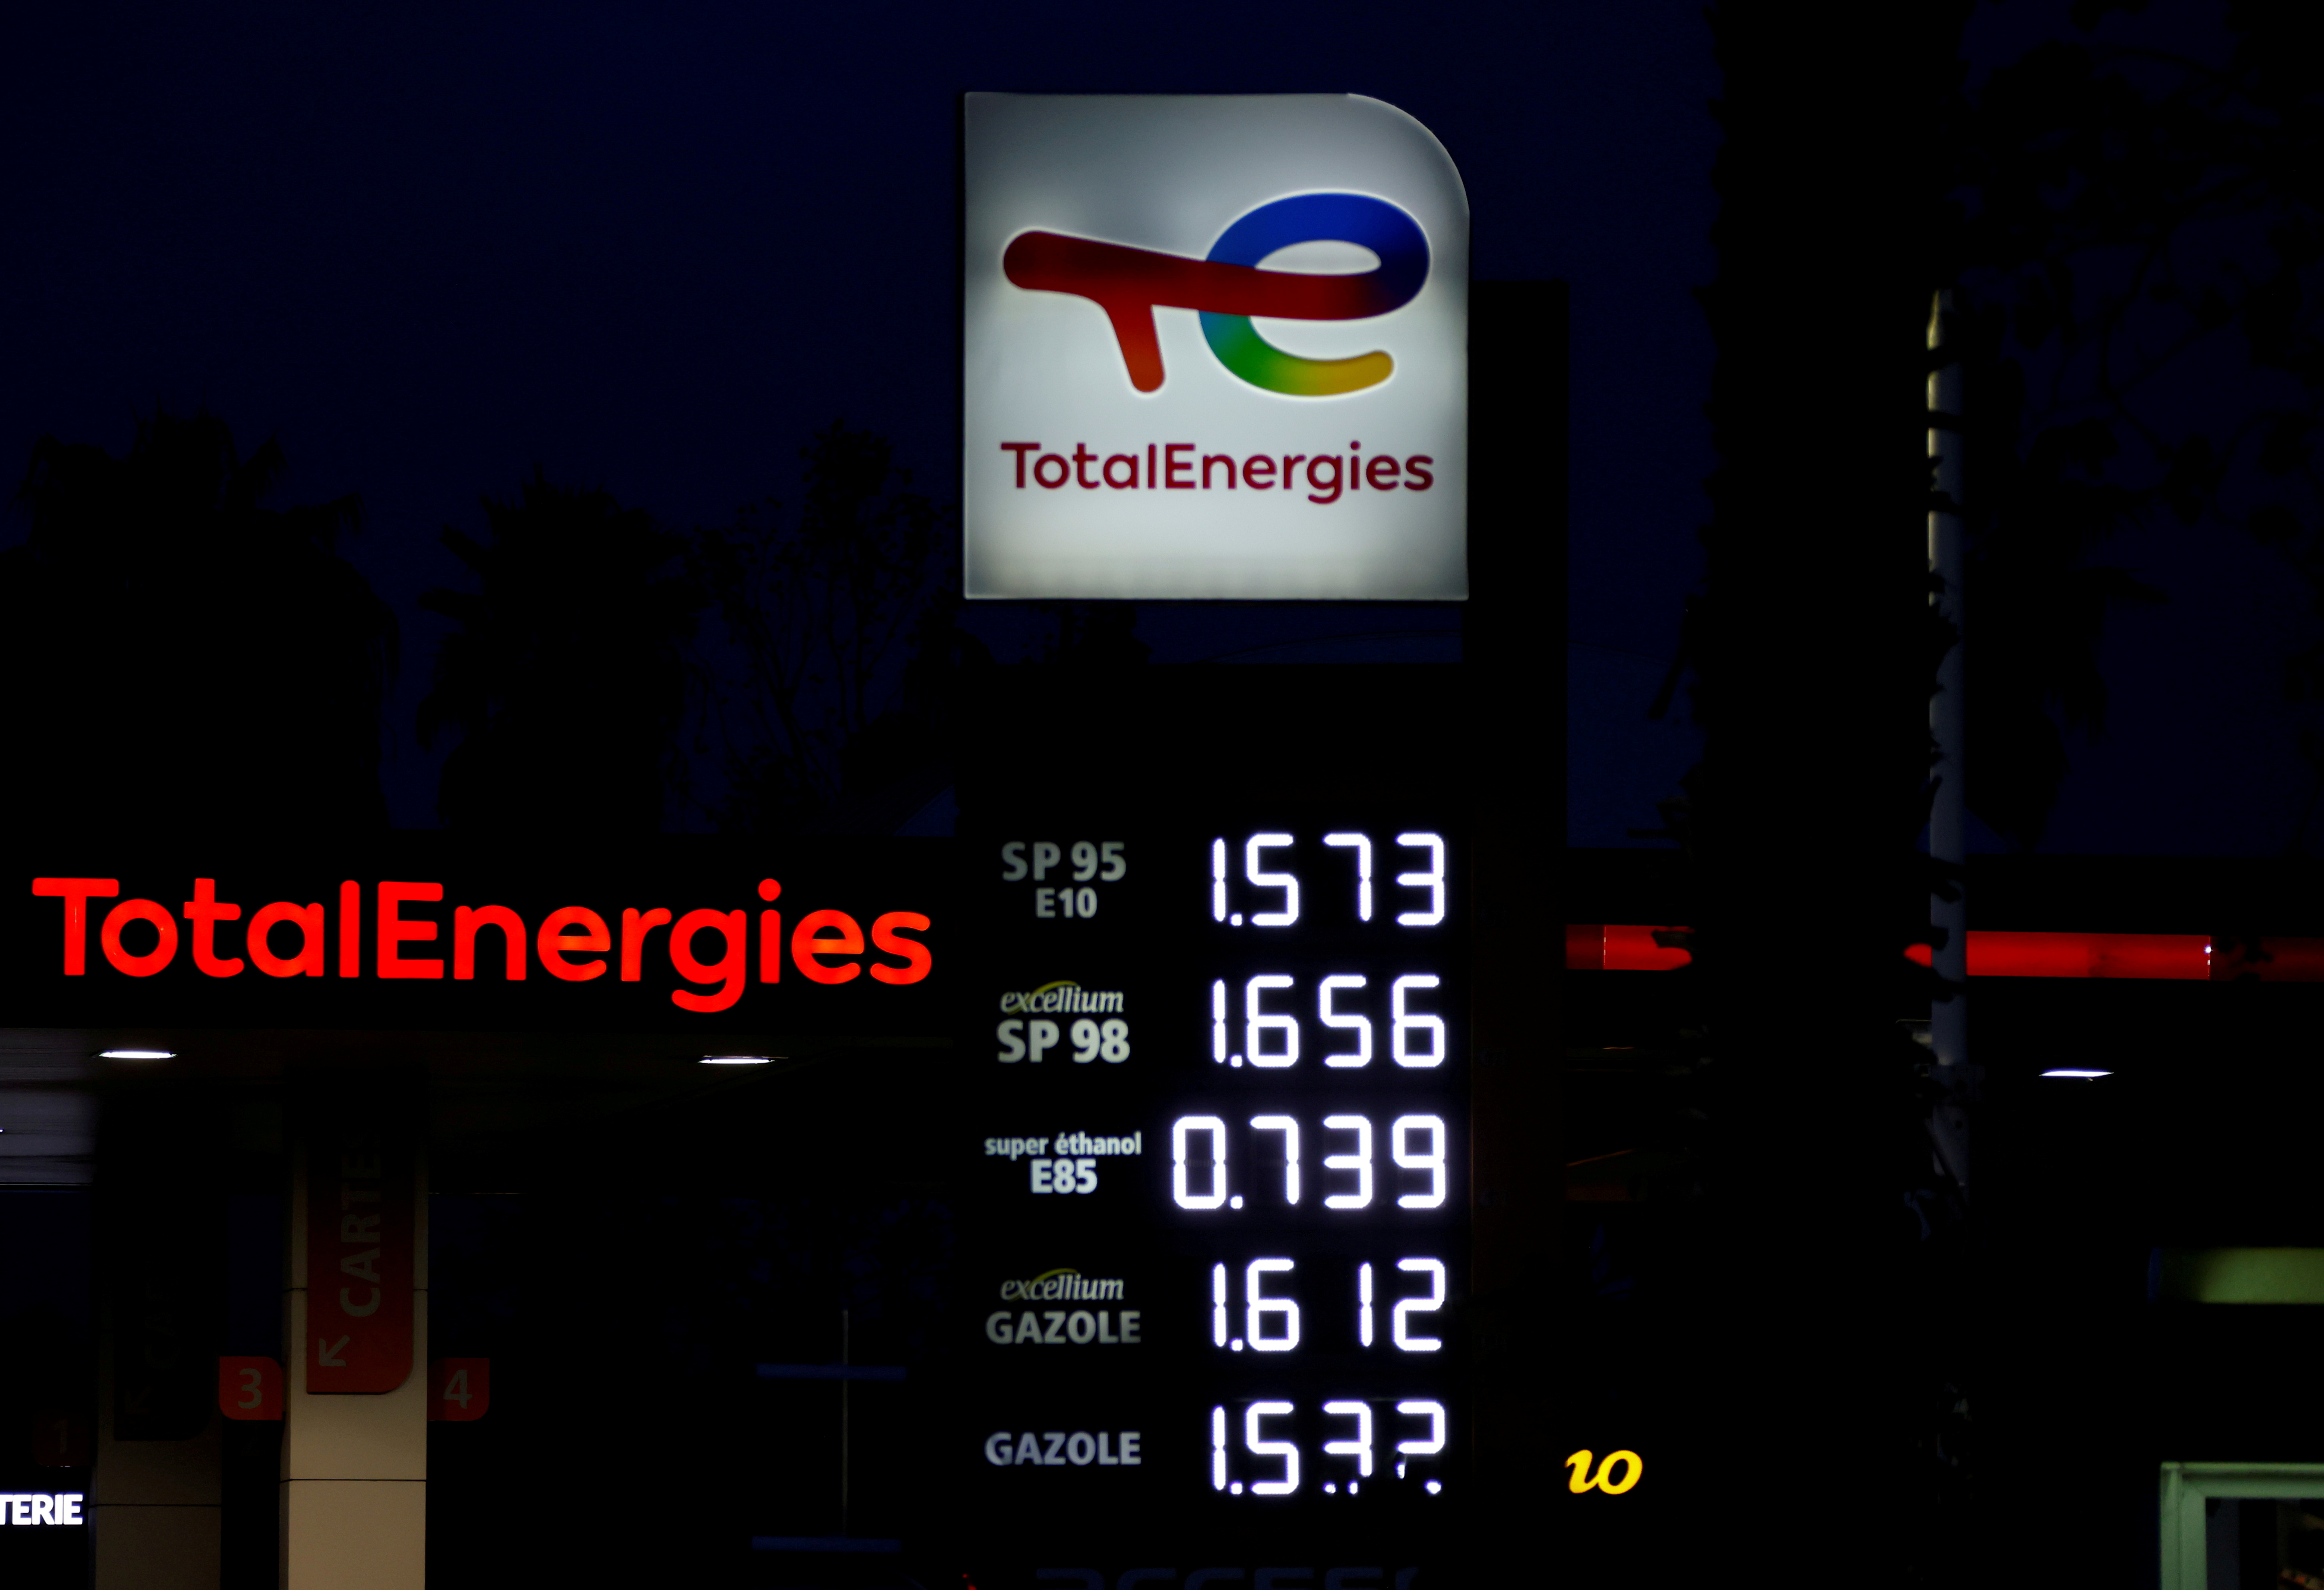 Fuel price signs are seen at a TotalEnergie petrol station in Nice